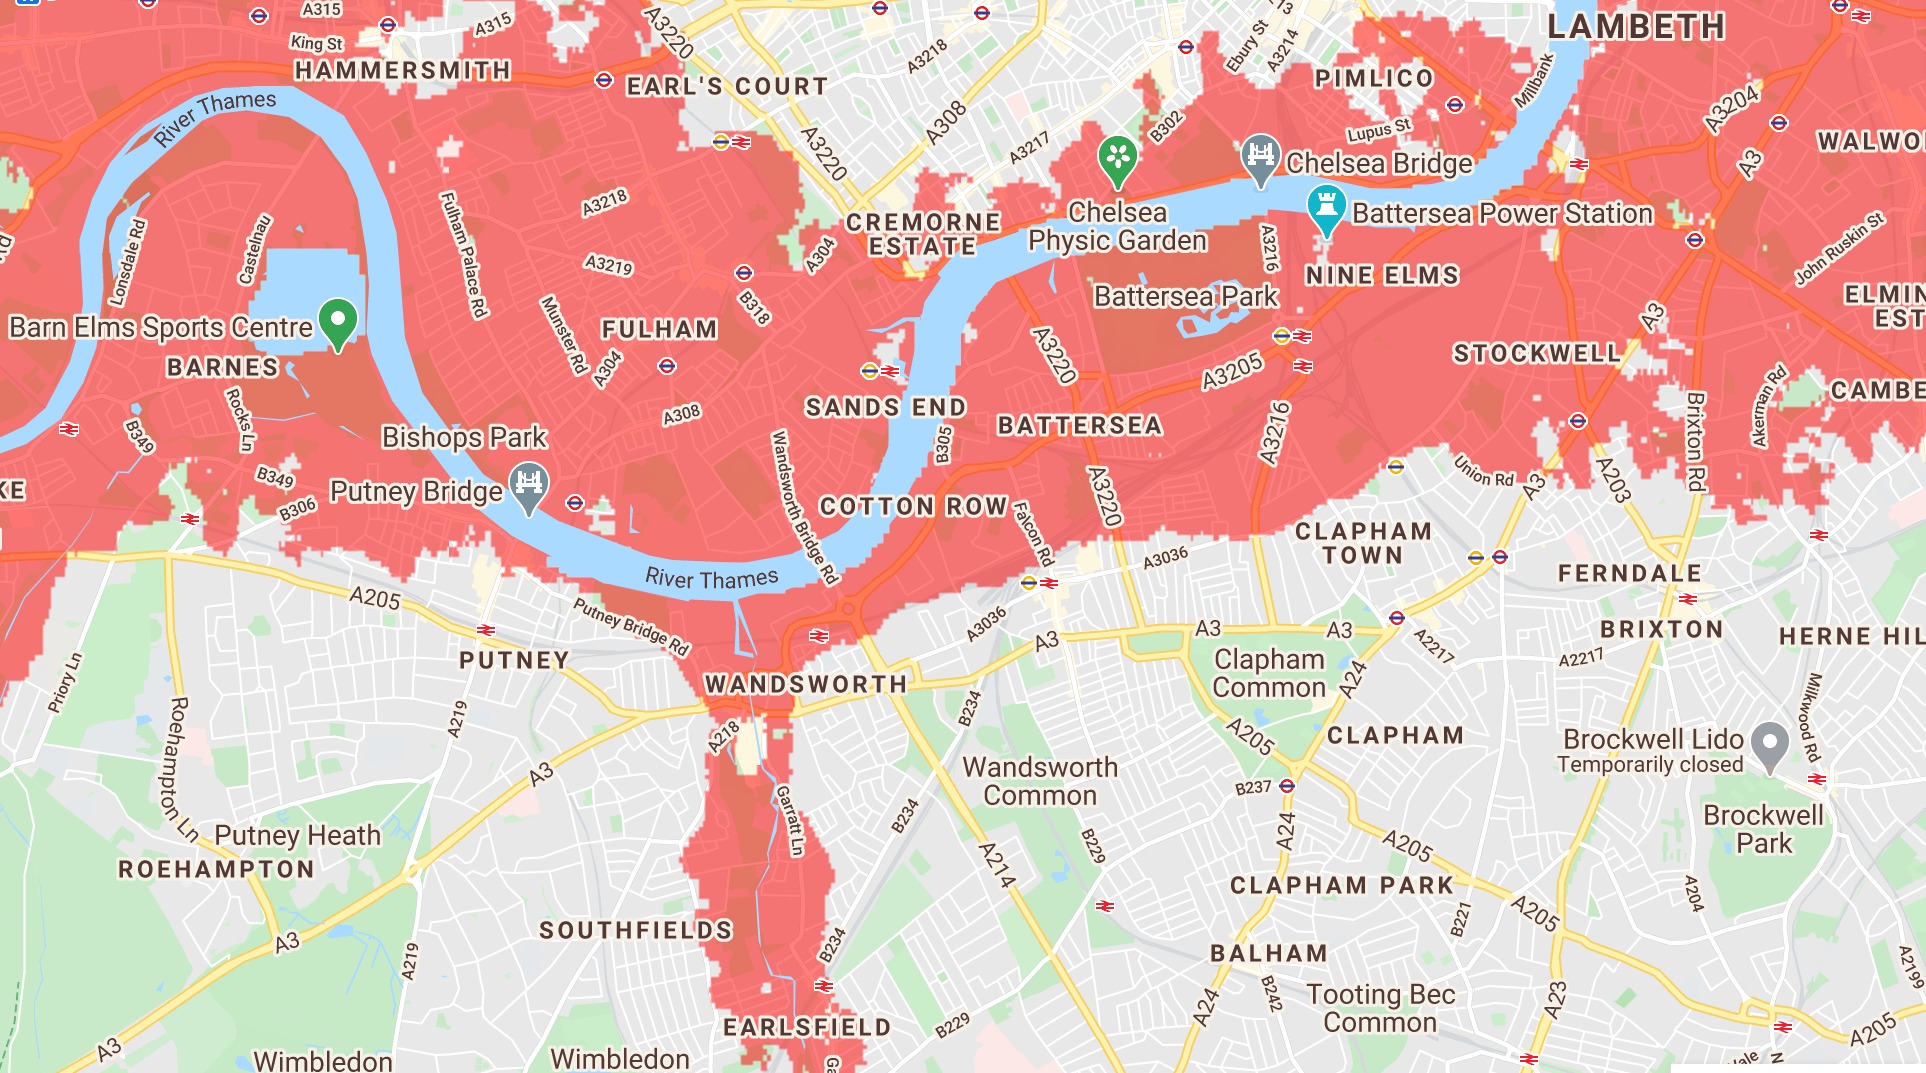 How parts of south London appear on the map. Picture: Climate Central